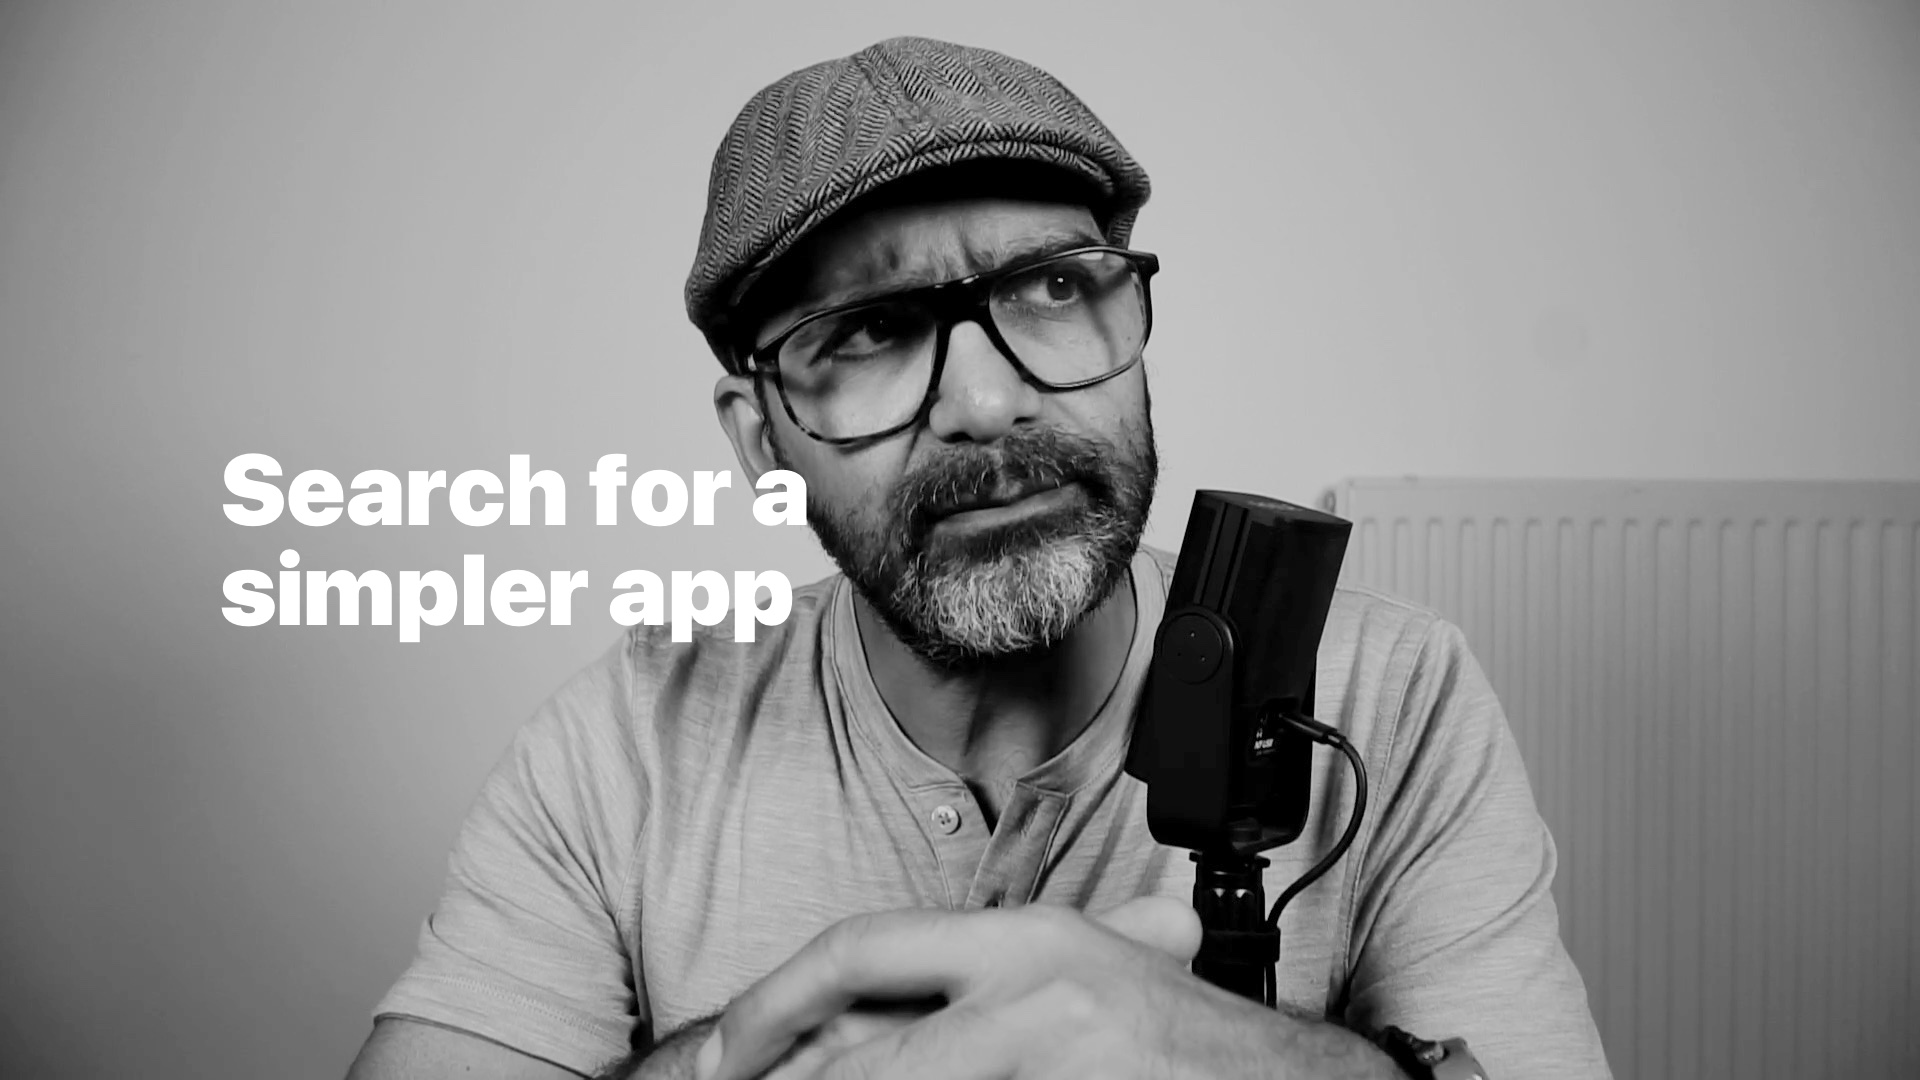 Search for a simpler app